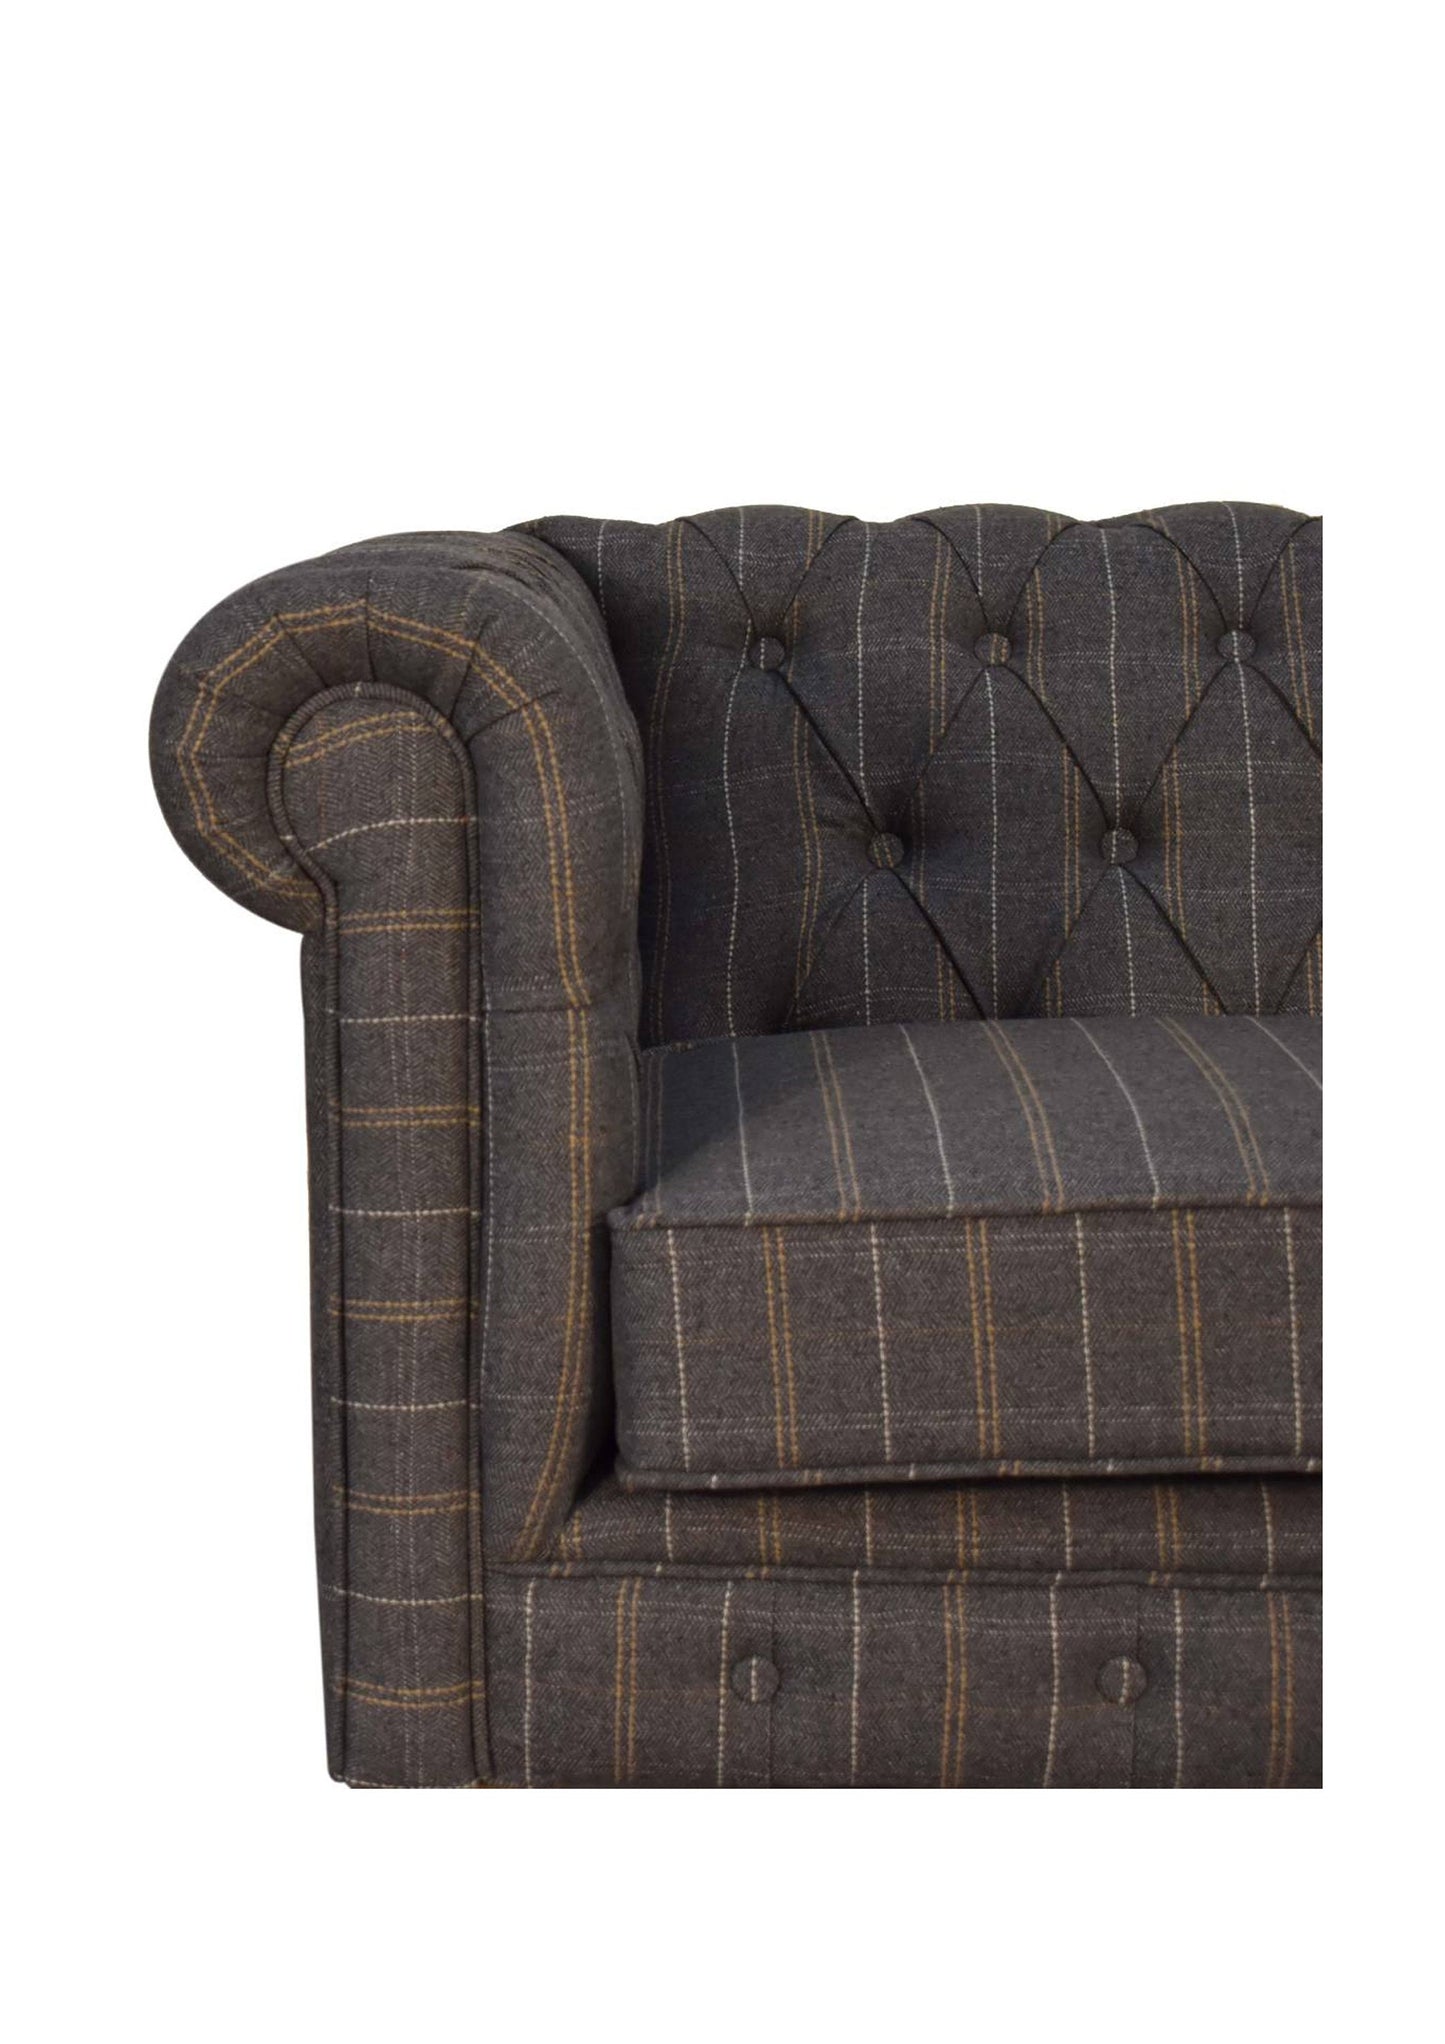 Pewter and Yellow Tweed Chesterfield 2 Seater 150cm wide Sofa Loveset for Bedroom Livingroom Country Style